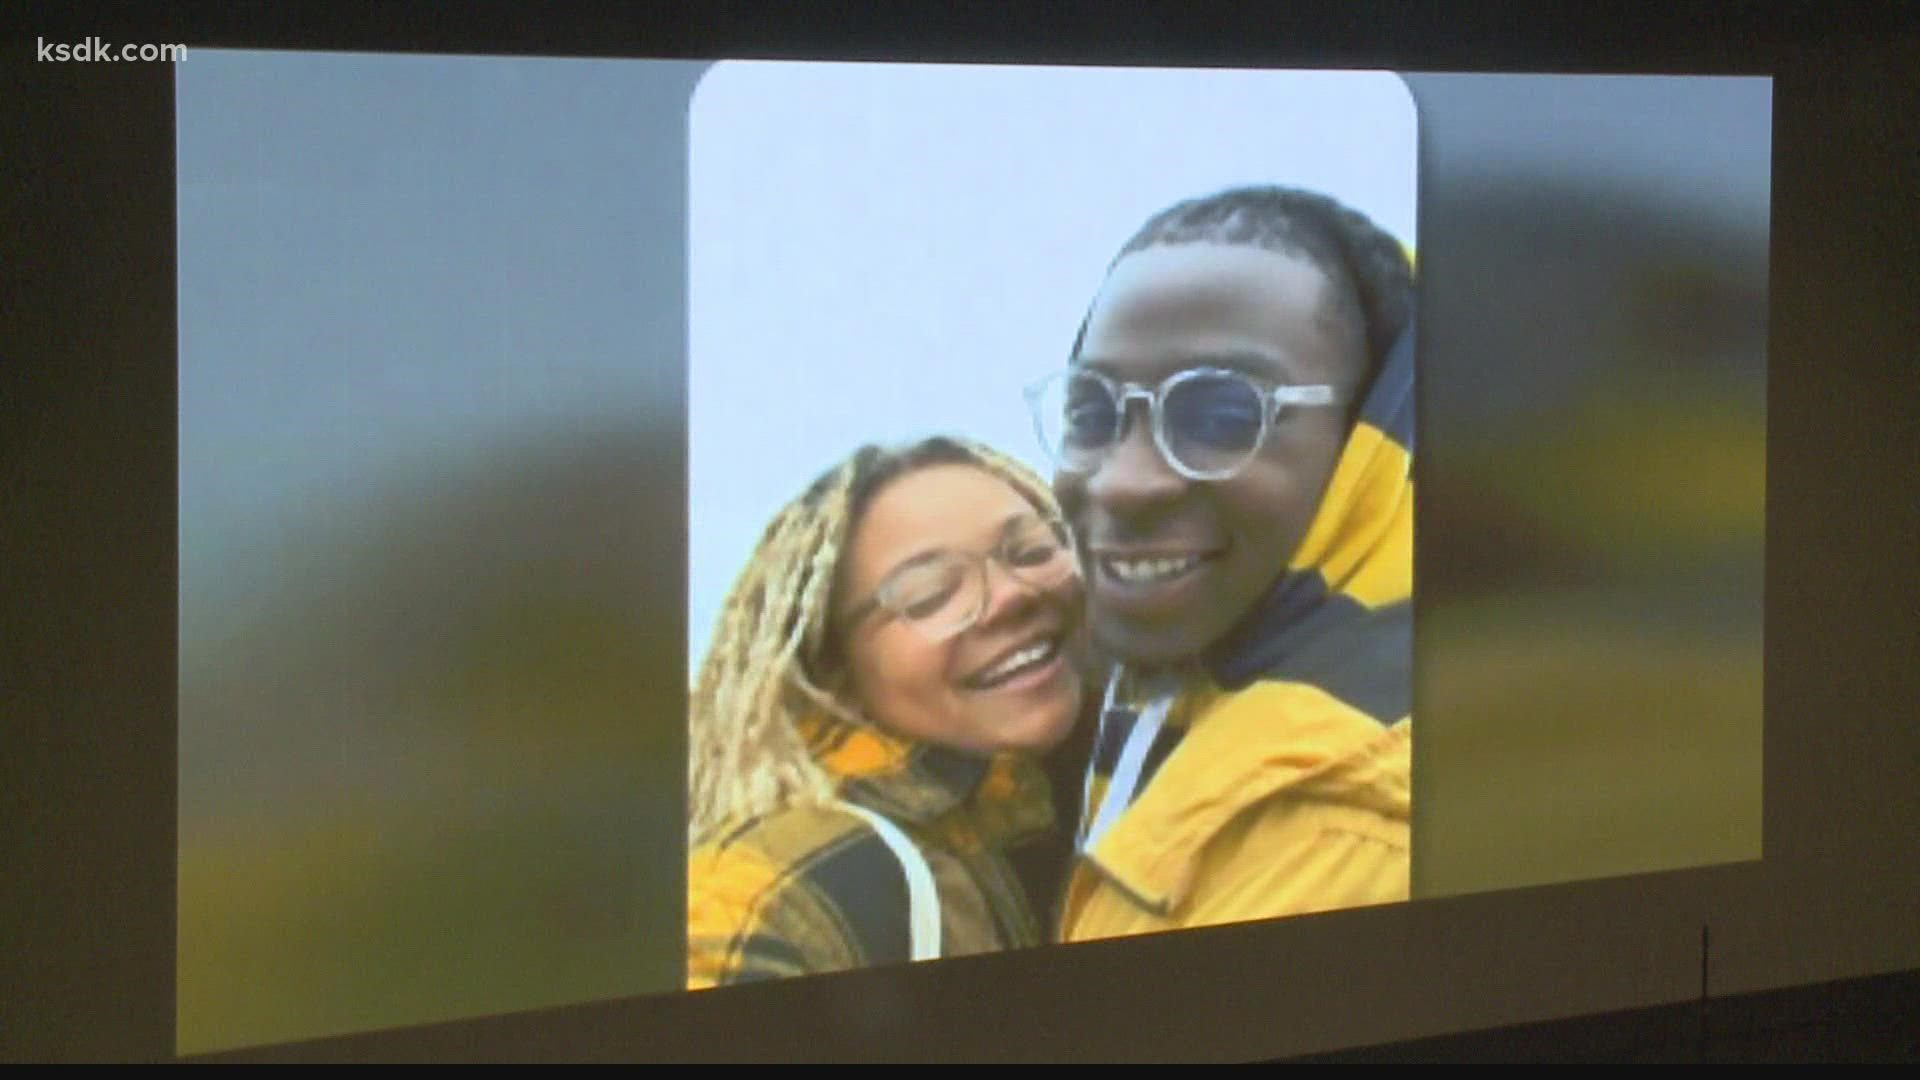 DeAndre Morrow's loved ones gathered at New Life in Christ Church in O'Fallon, Illinois to pay their respects.